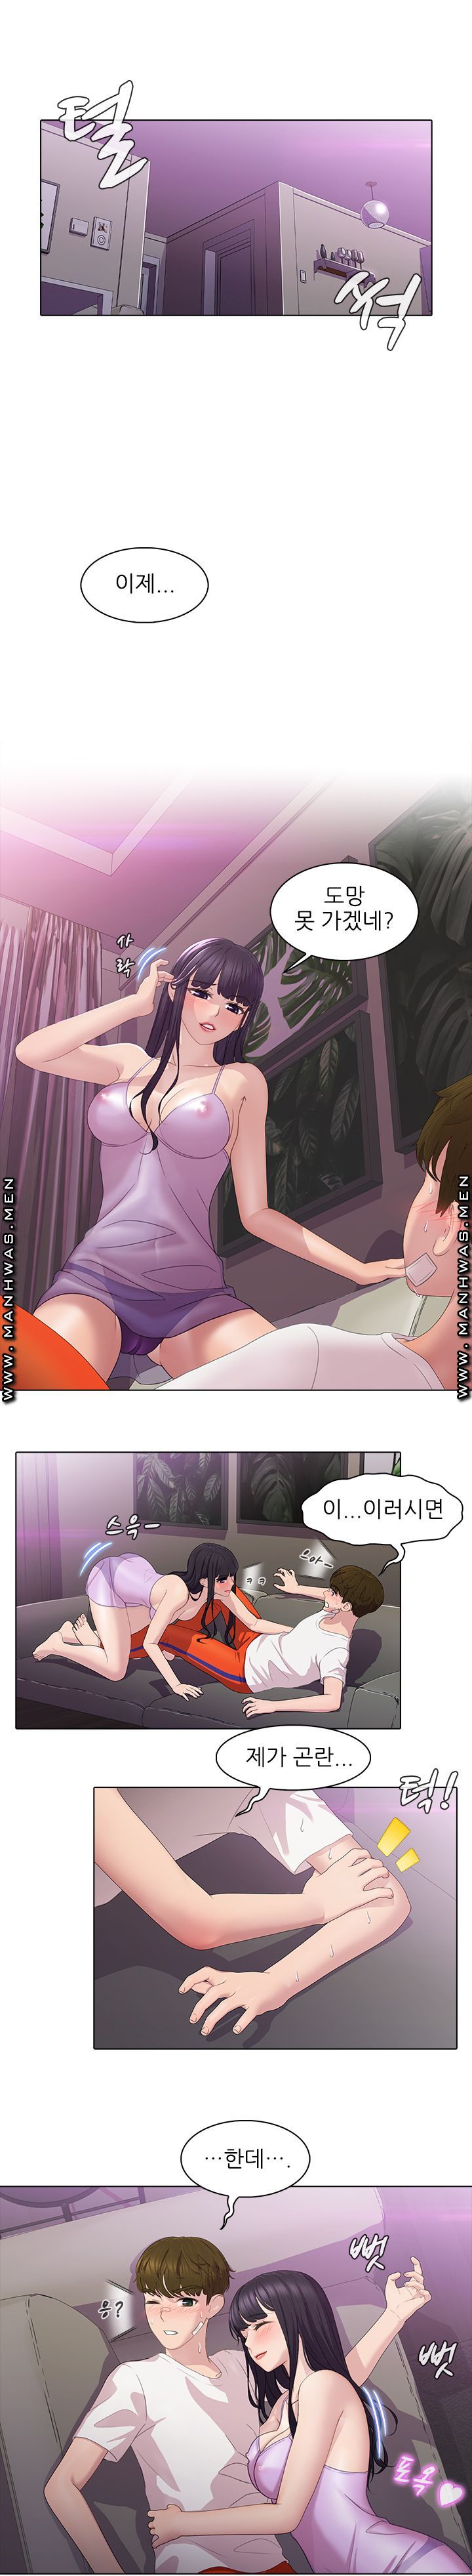 Sister's Friend Raw - Chapter 3 Page 3